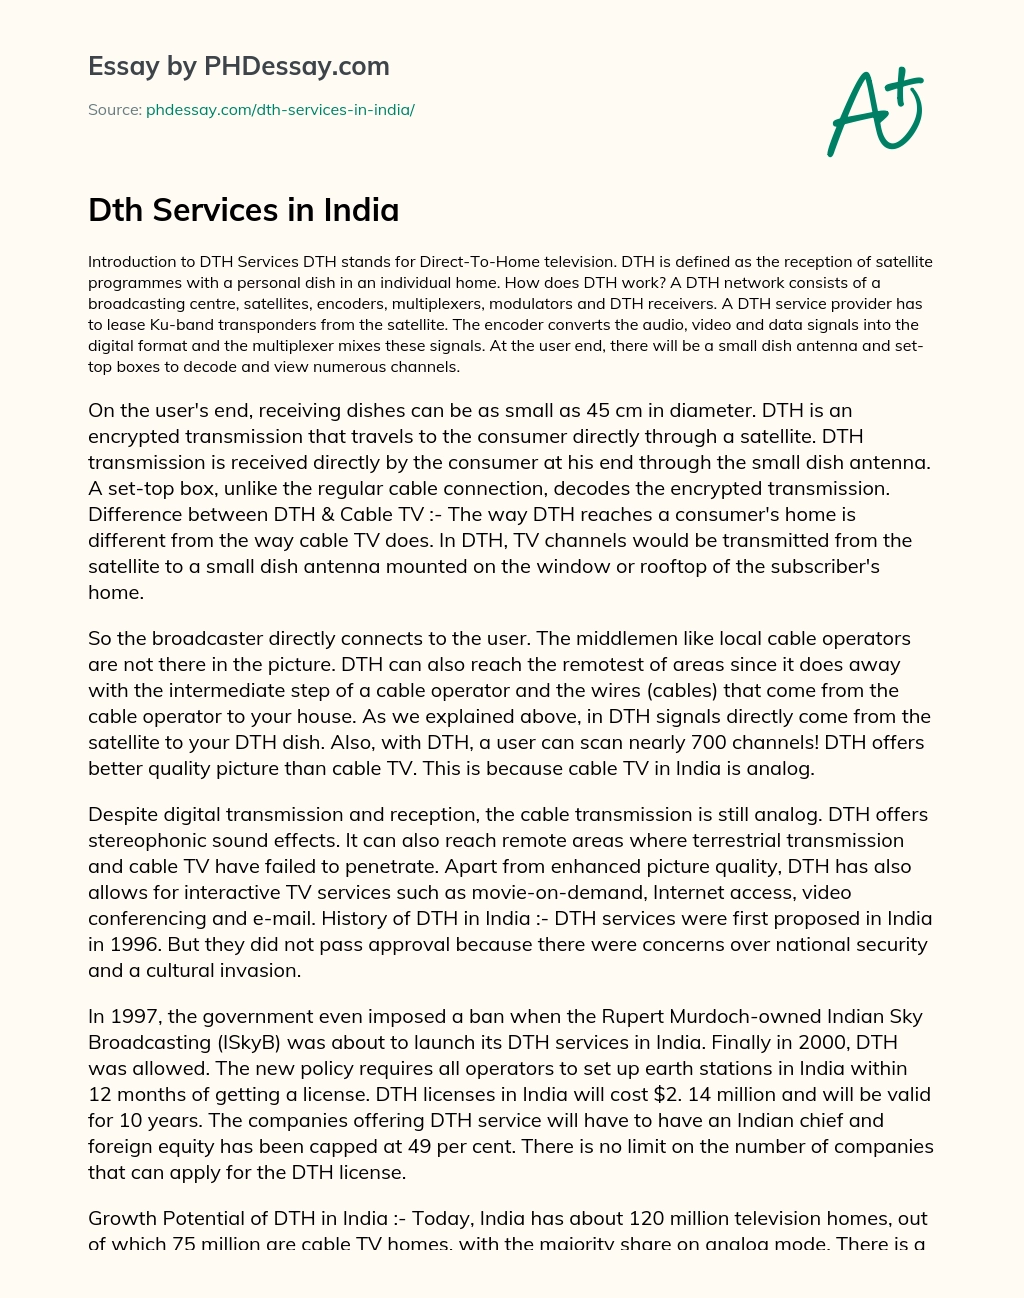 Dth Services in India essay